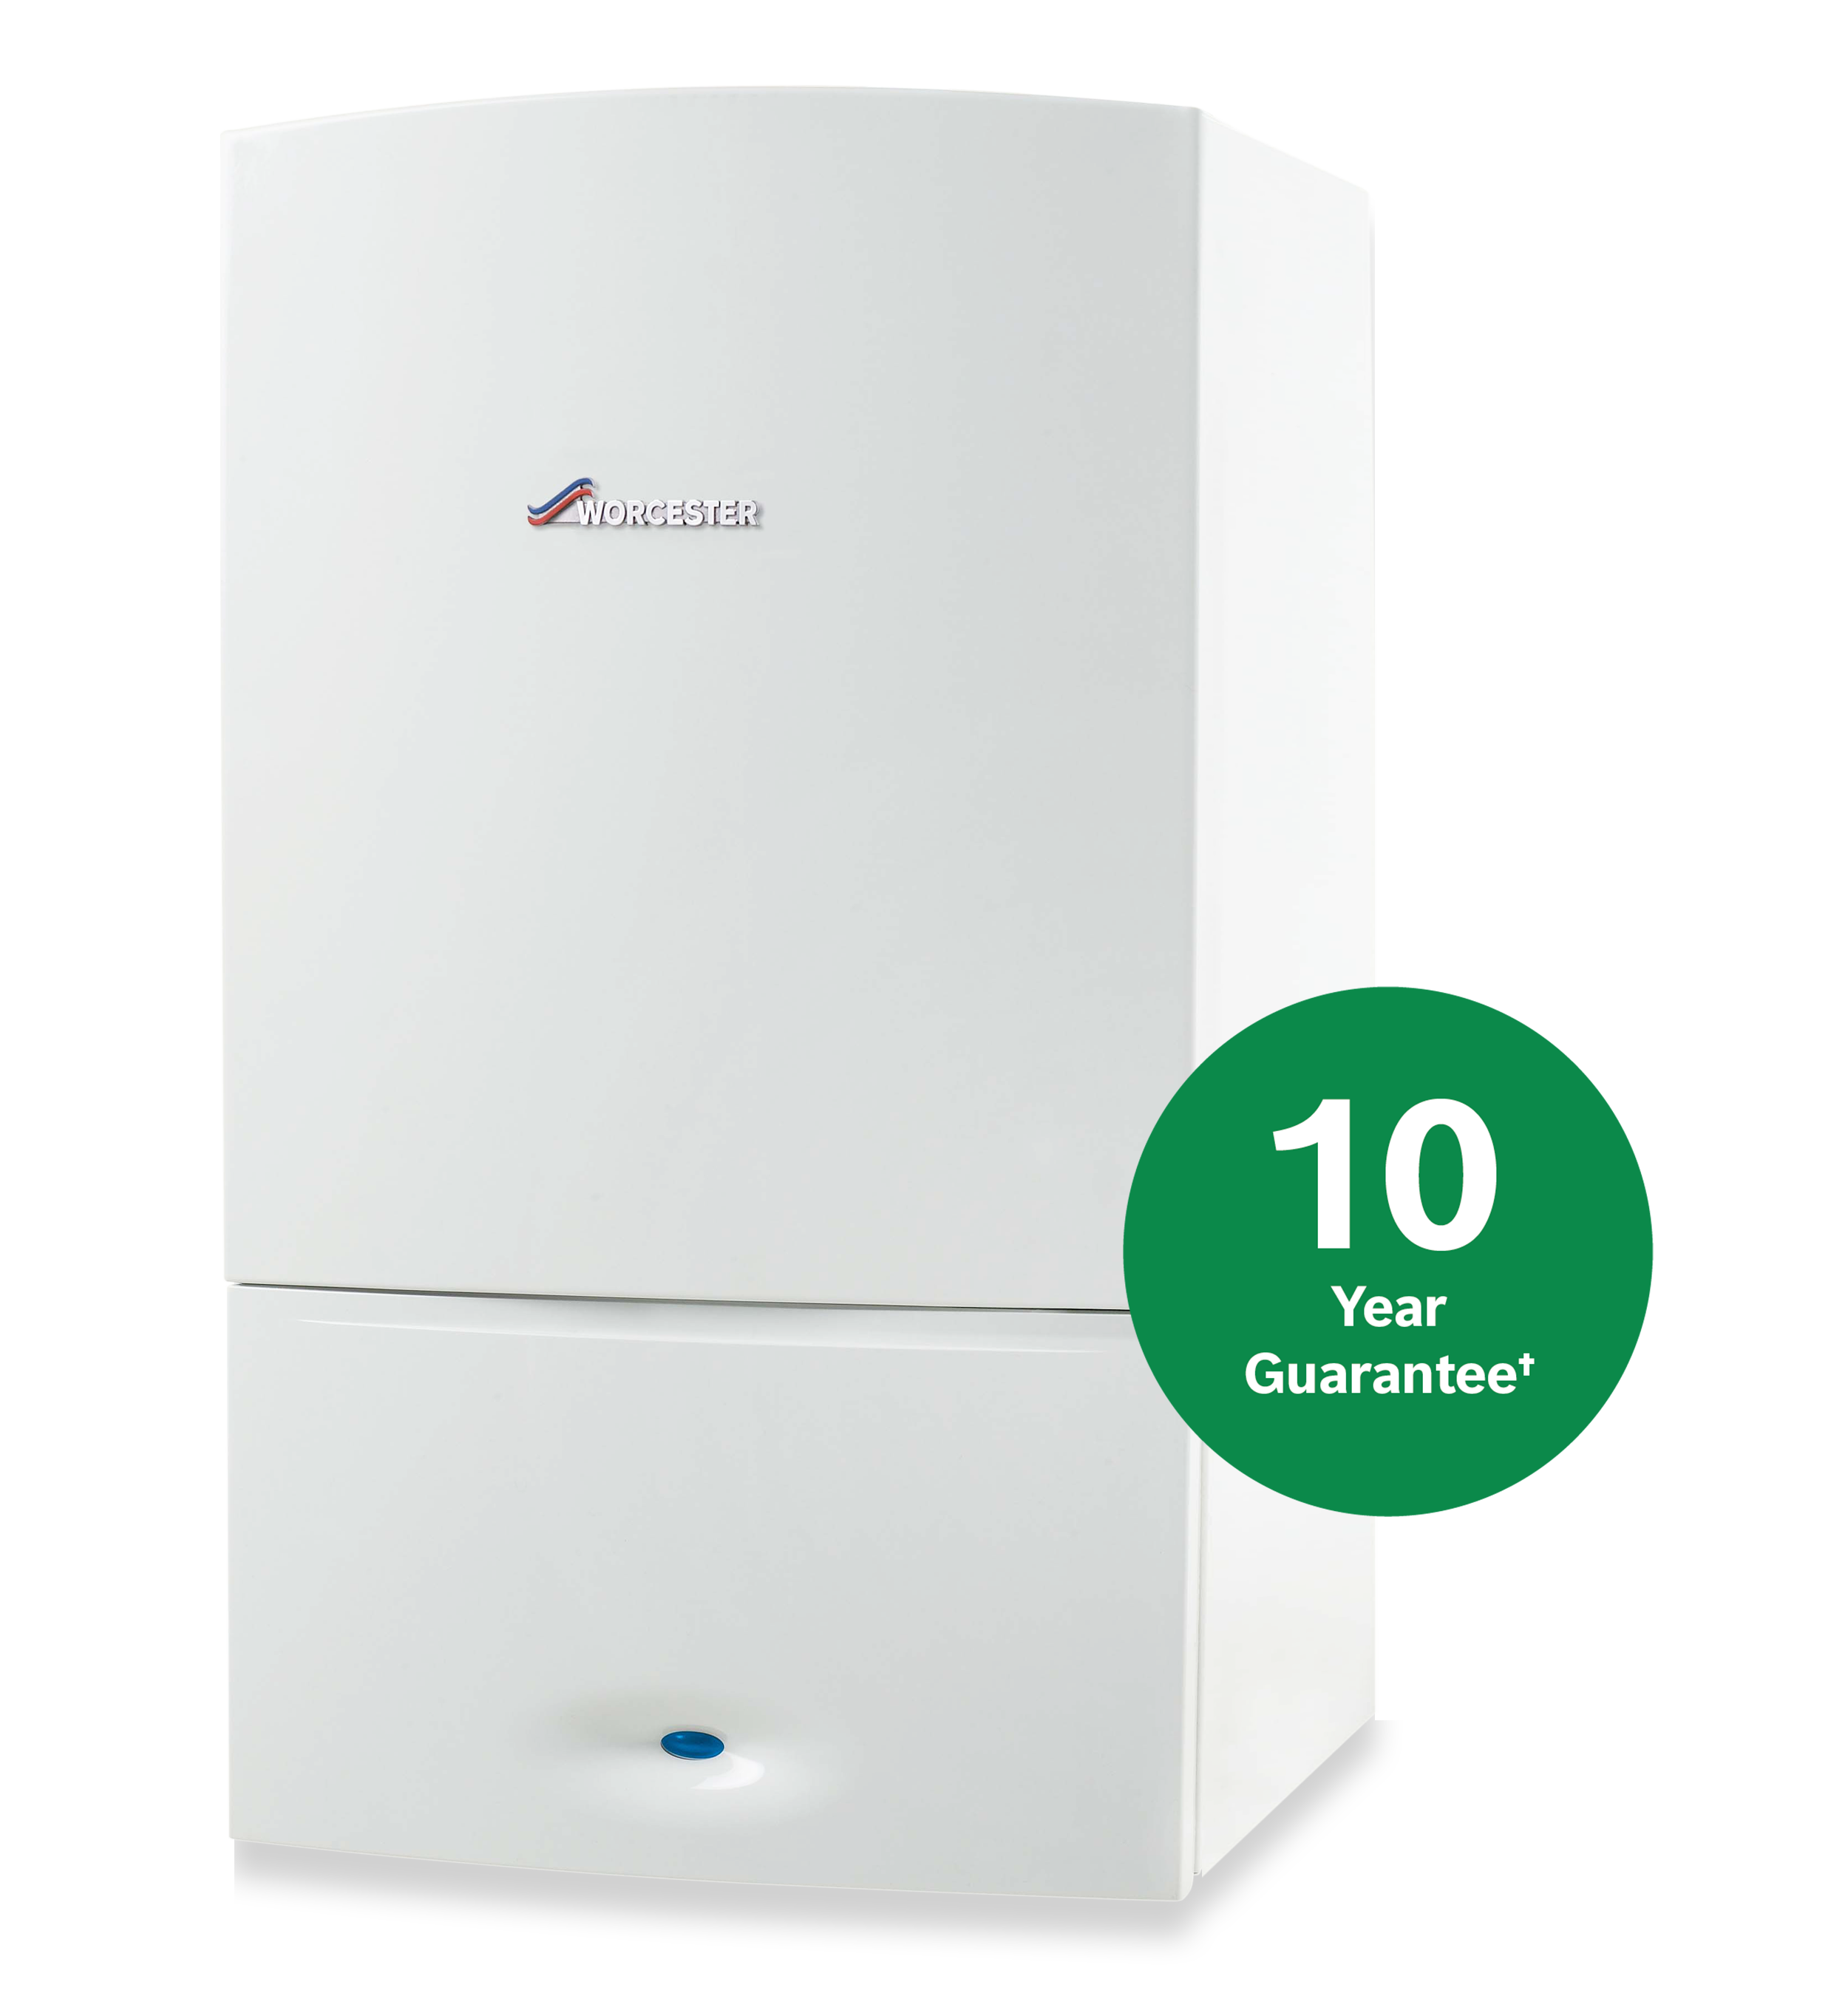 Greenstar i System (27kW and 30kW)